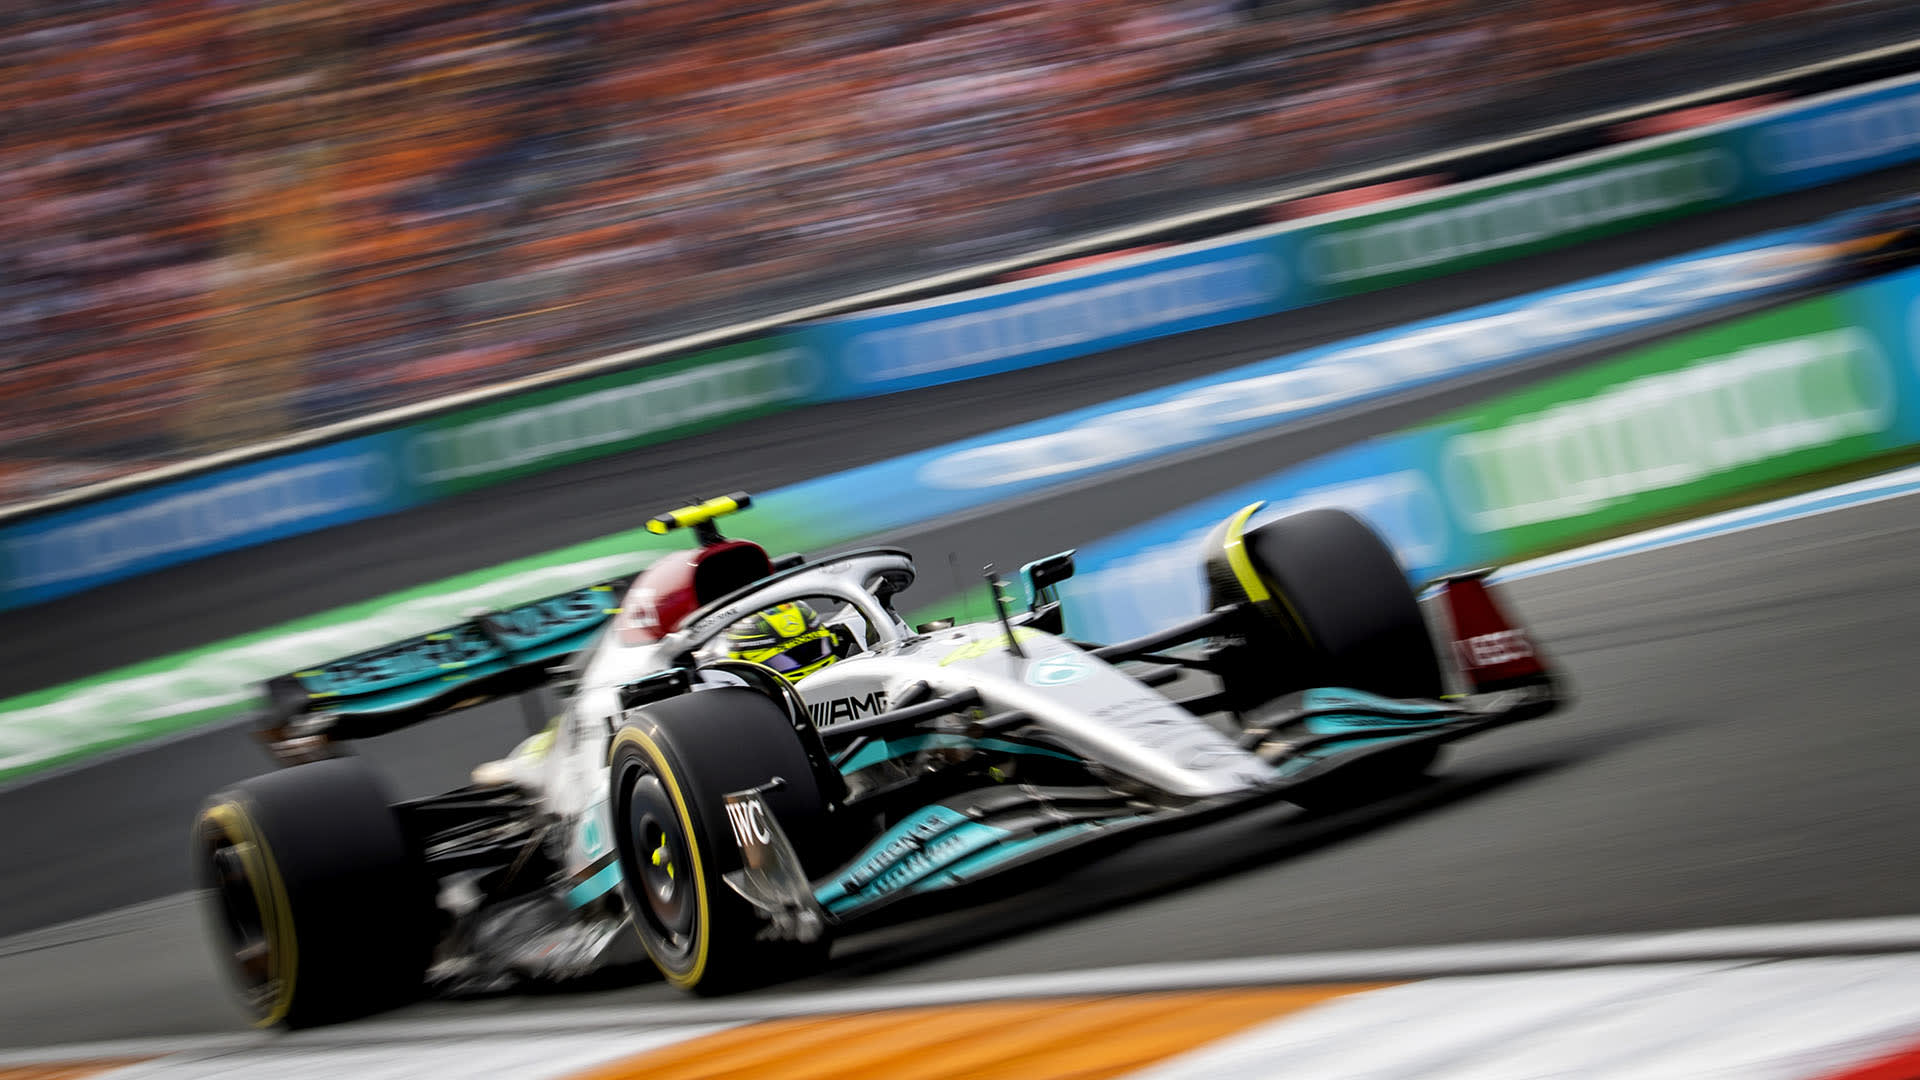 violist Afstoting Canada I was hopeful we were going to get a 1-2' says Hamilton, as he apologises  for angry Dutch GP radio outbursts | Formula 1®